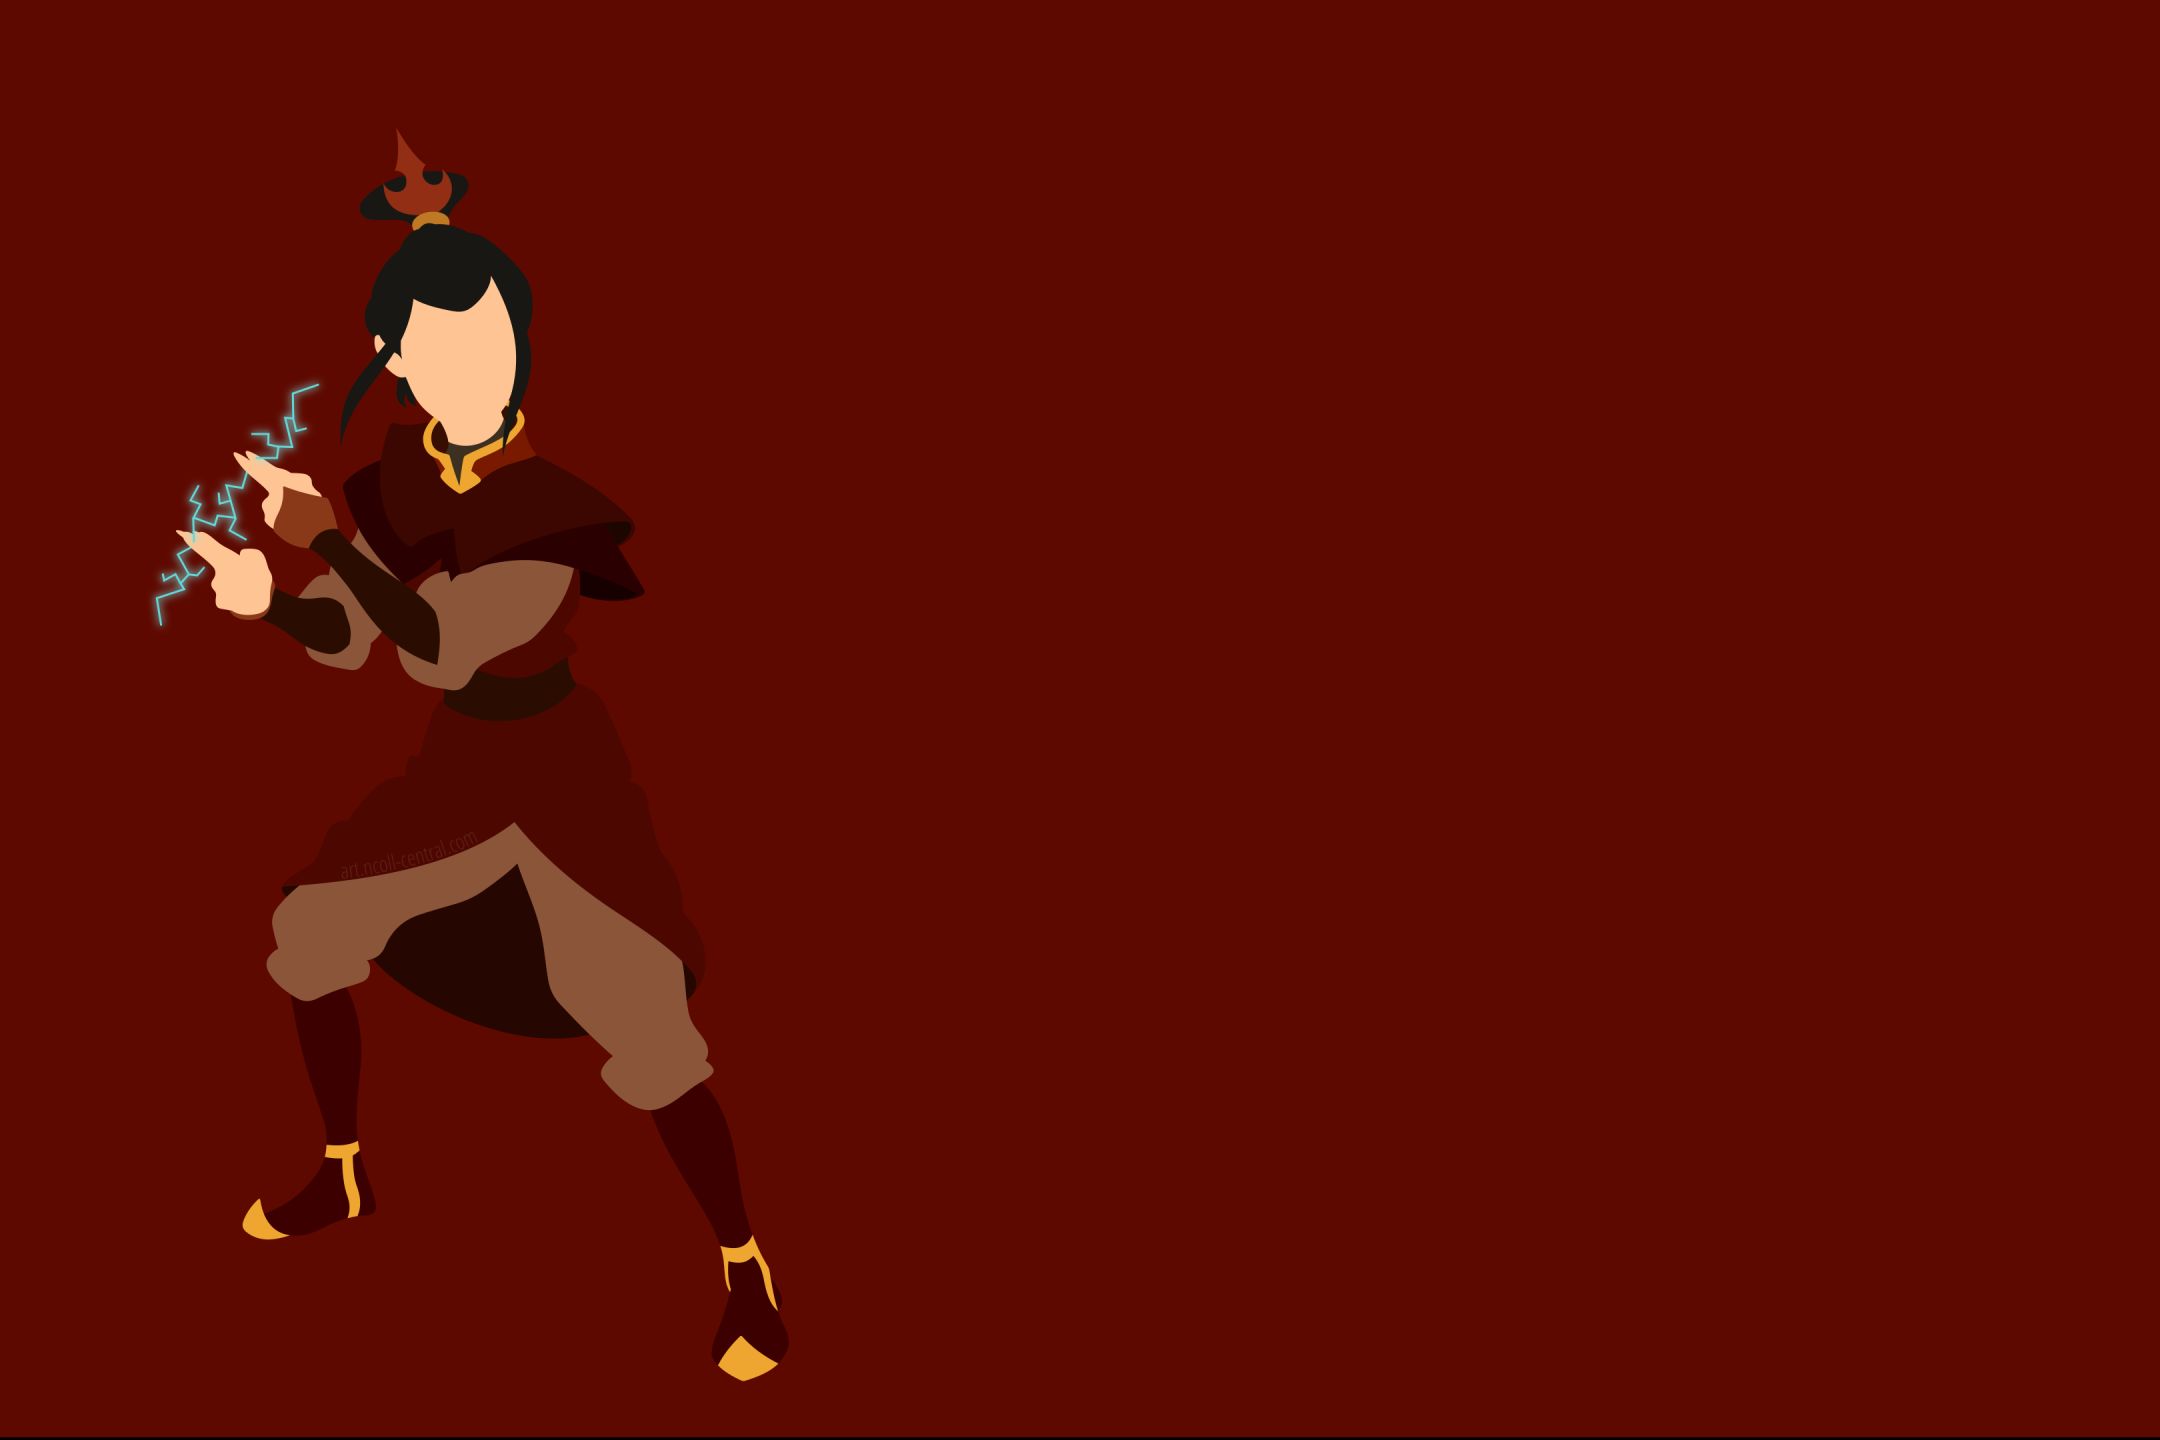 Azula (Avatar) wallpapers for desktop, download free Azula (Avatar)  pictures and backgrounds for PC 